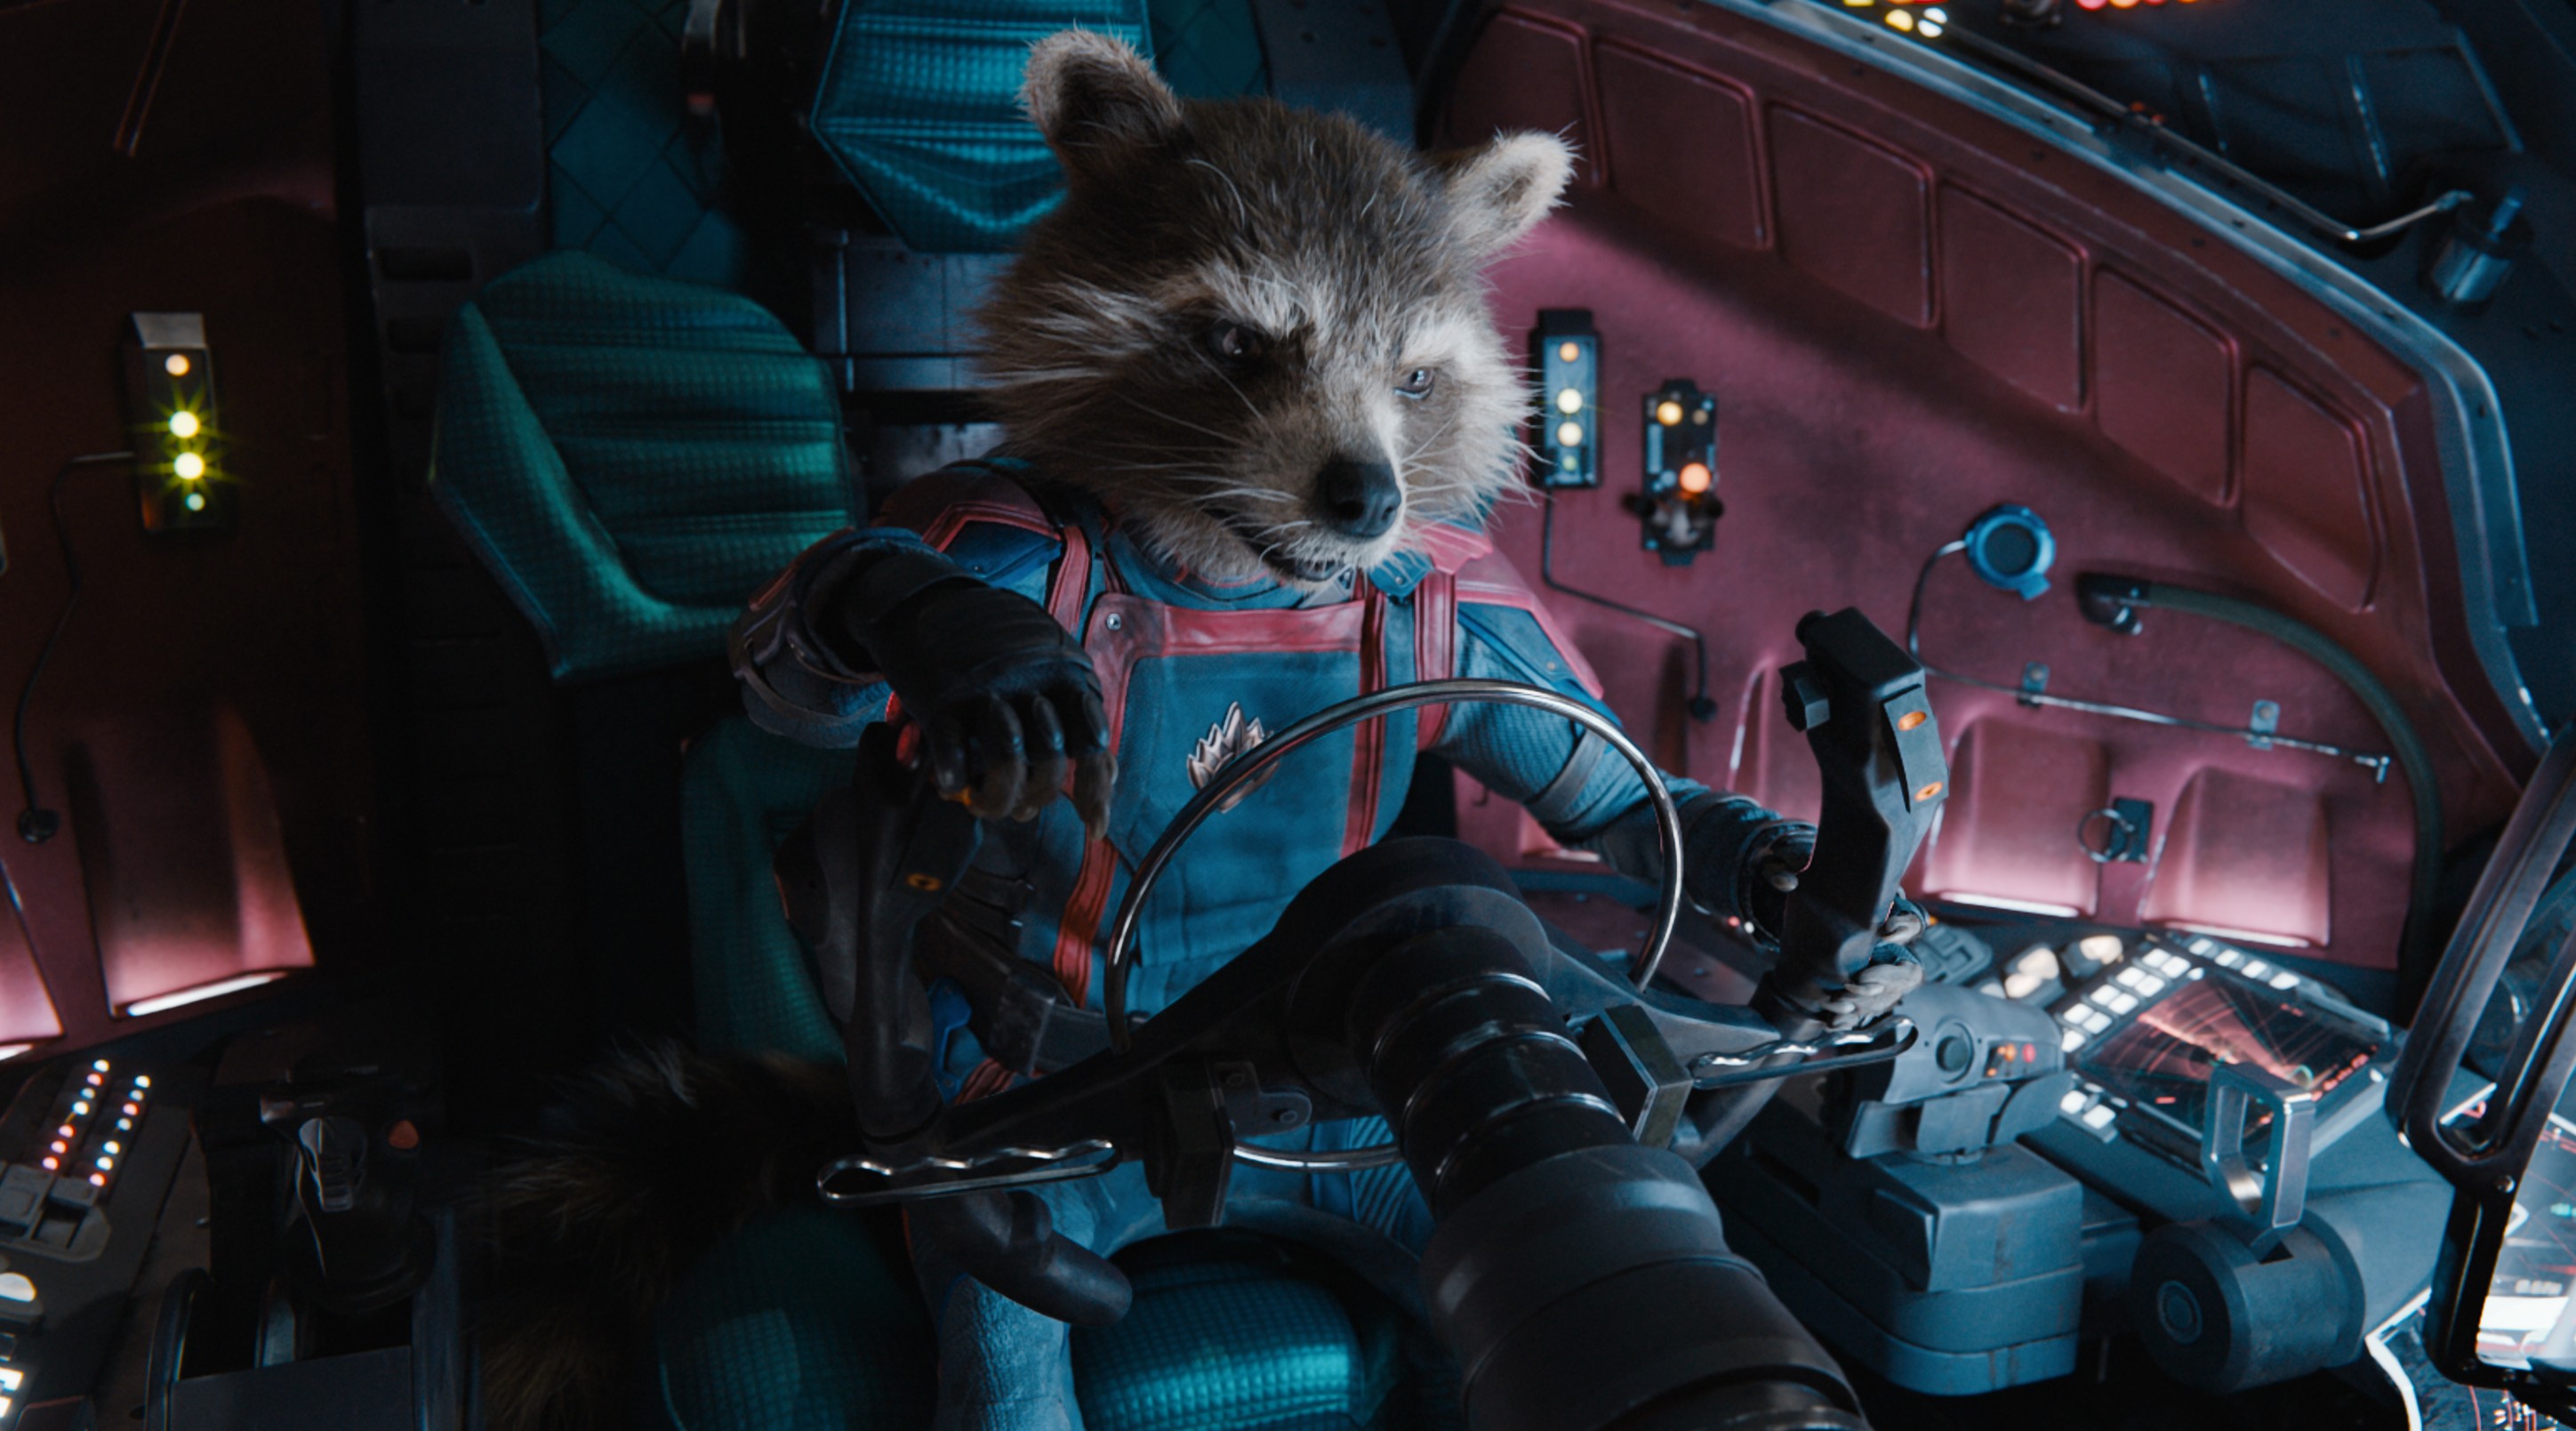 Guardians of the Galaxy Vol. 3' Is an Awkward Franchise Finale